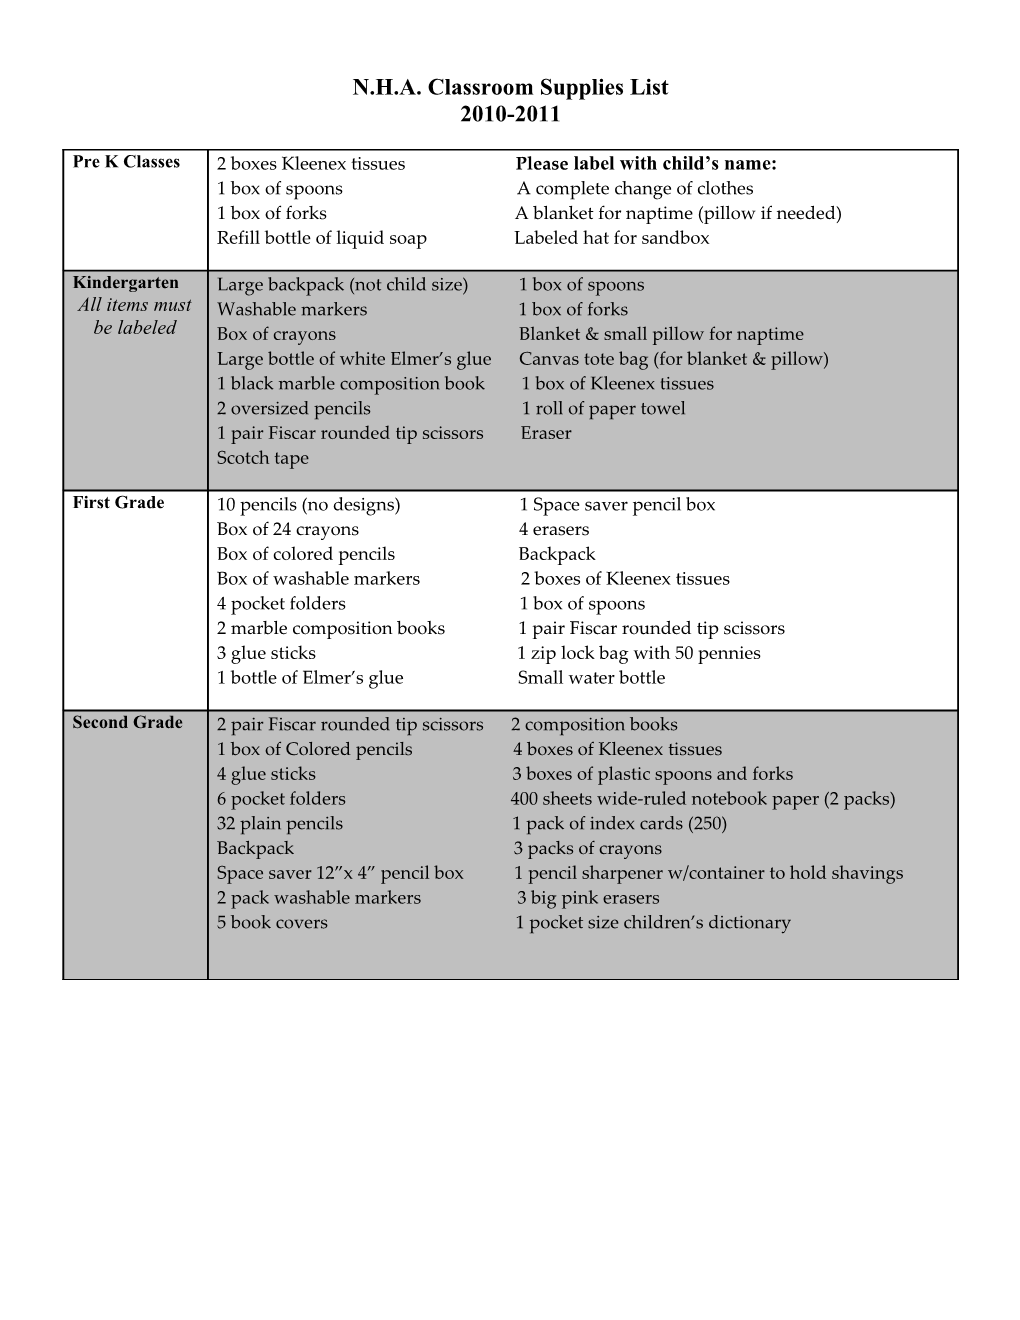 Classroom Supplies Needed by Each Student